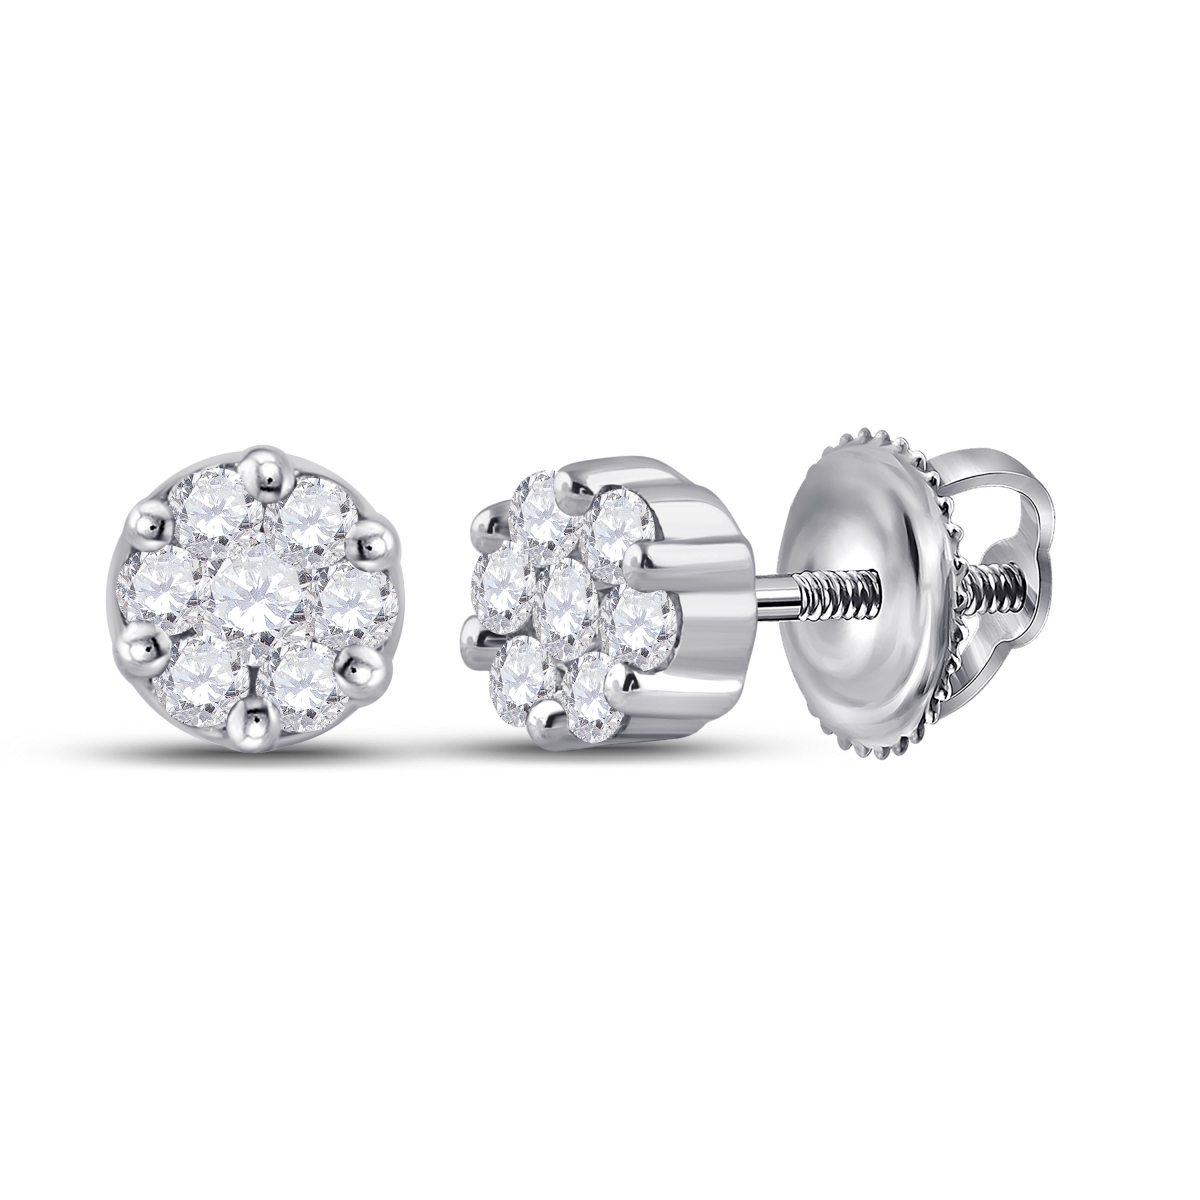 Picture of GND 74589 Sterling Silver Womens Round Diamondmond Flower Cluster Stud Earrings - 0.17 CTTW